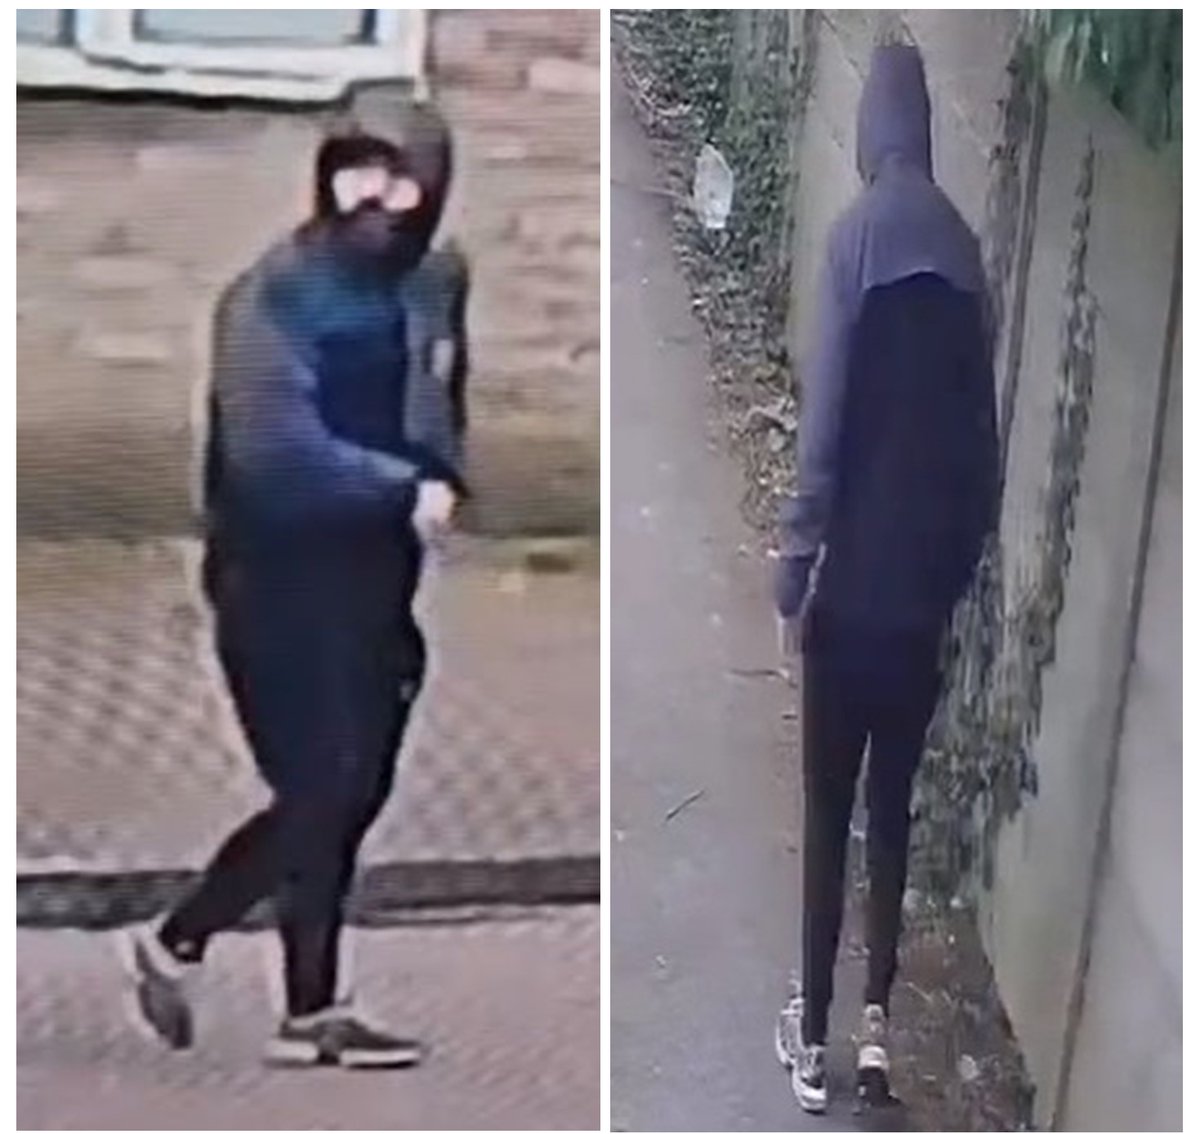 Detectives investigating a reported burglary in #Broadstairs have released CCTV images of a man they would like to identify. Find out more - including how you can help - on our website: kent.police.uk/news/kent/late…